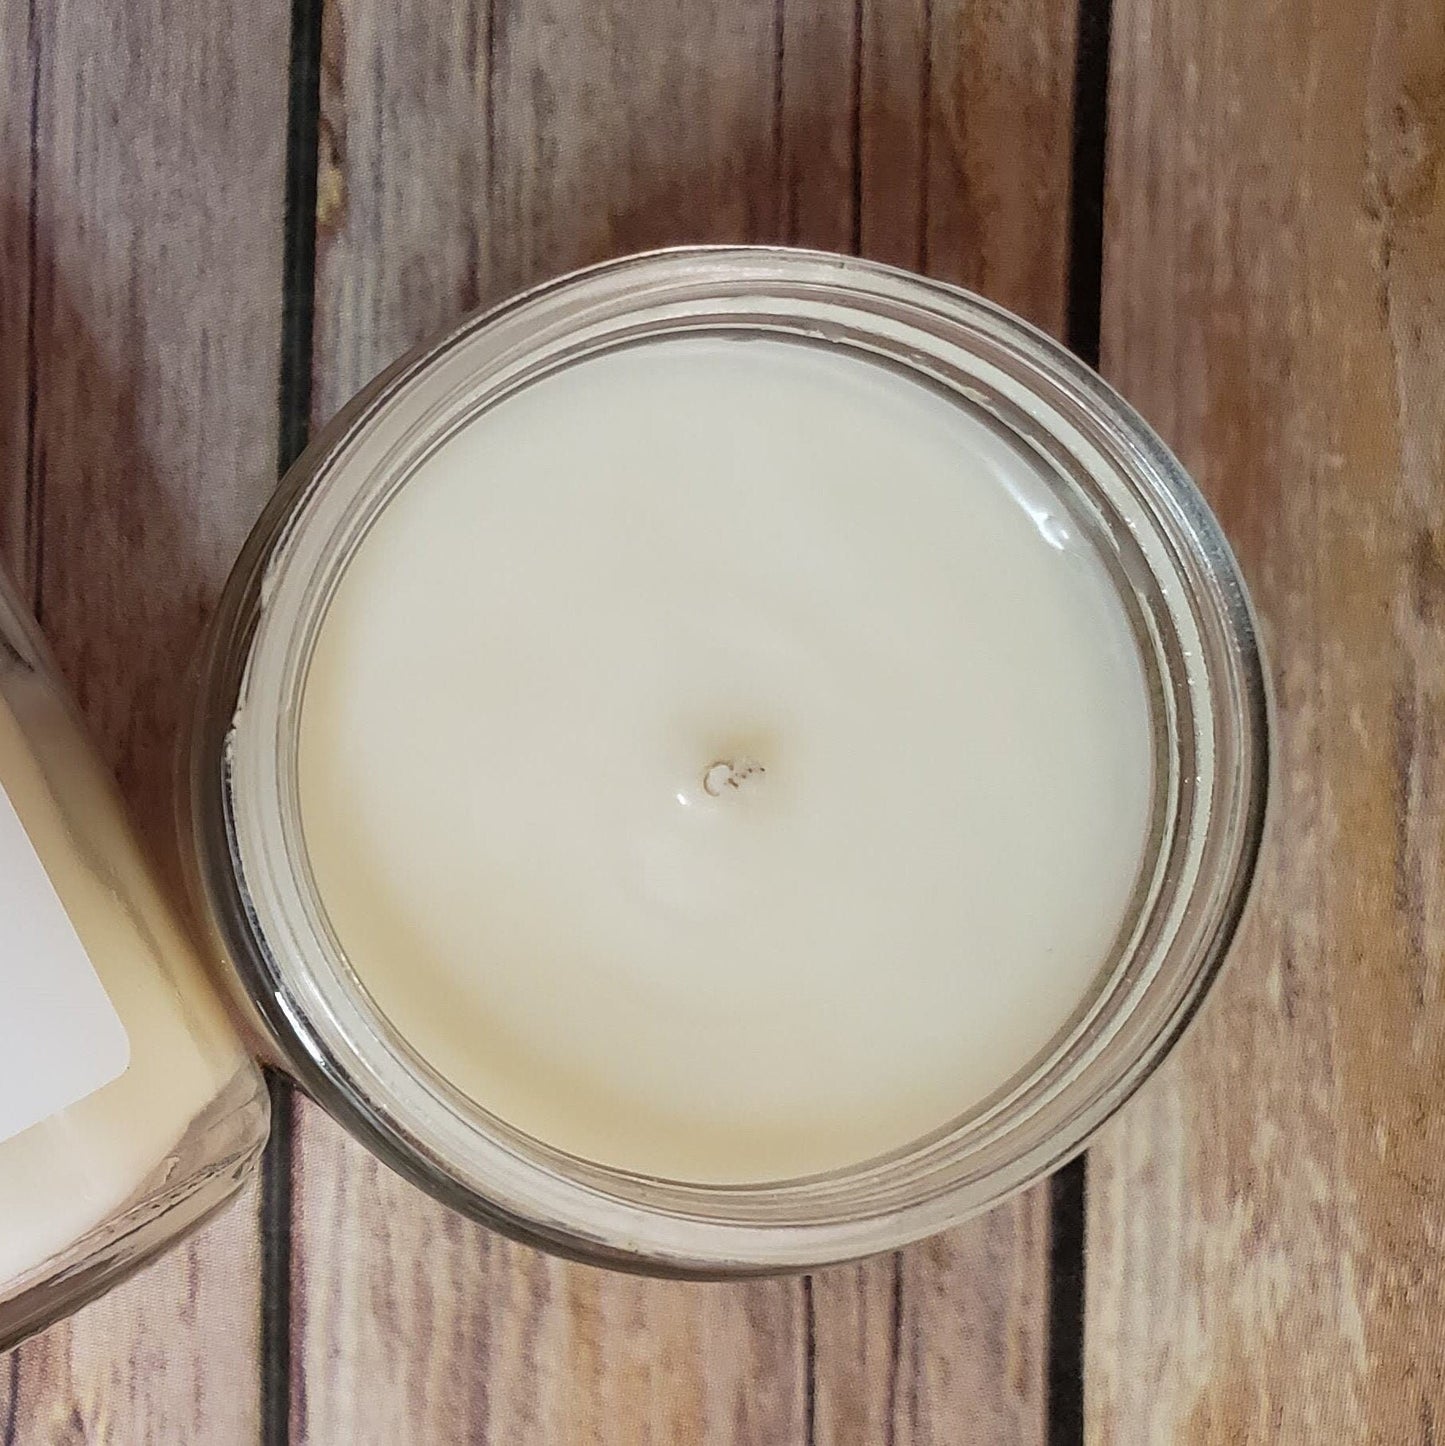 Ivy Creek No 33 | Himalayan Bamboo Soy Blend Candle | Hand Poured | 7 oz | Cotton Wick | Small Batch | Clean Burning | Container Candle